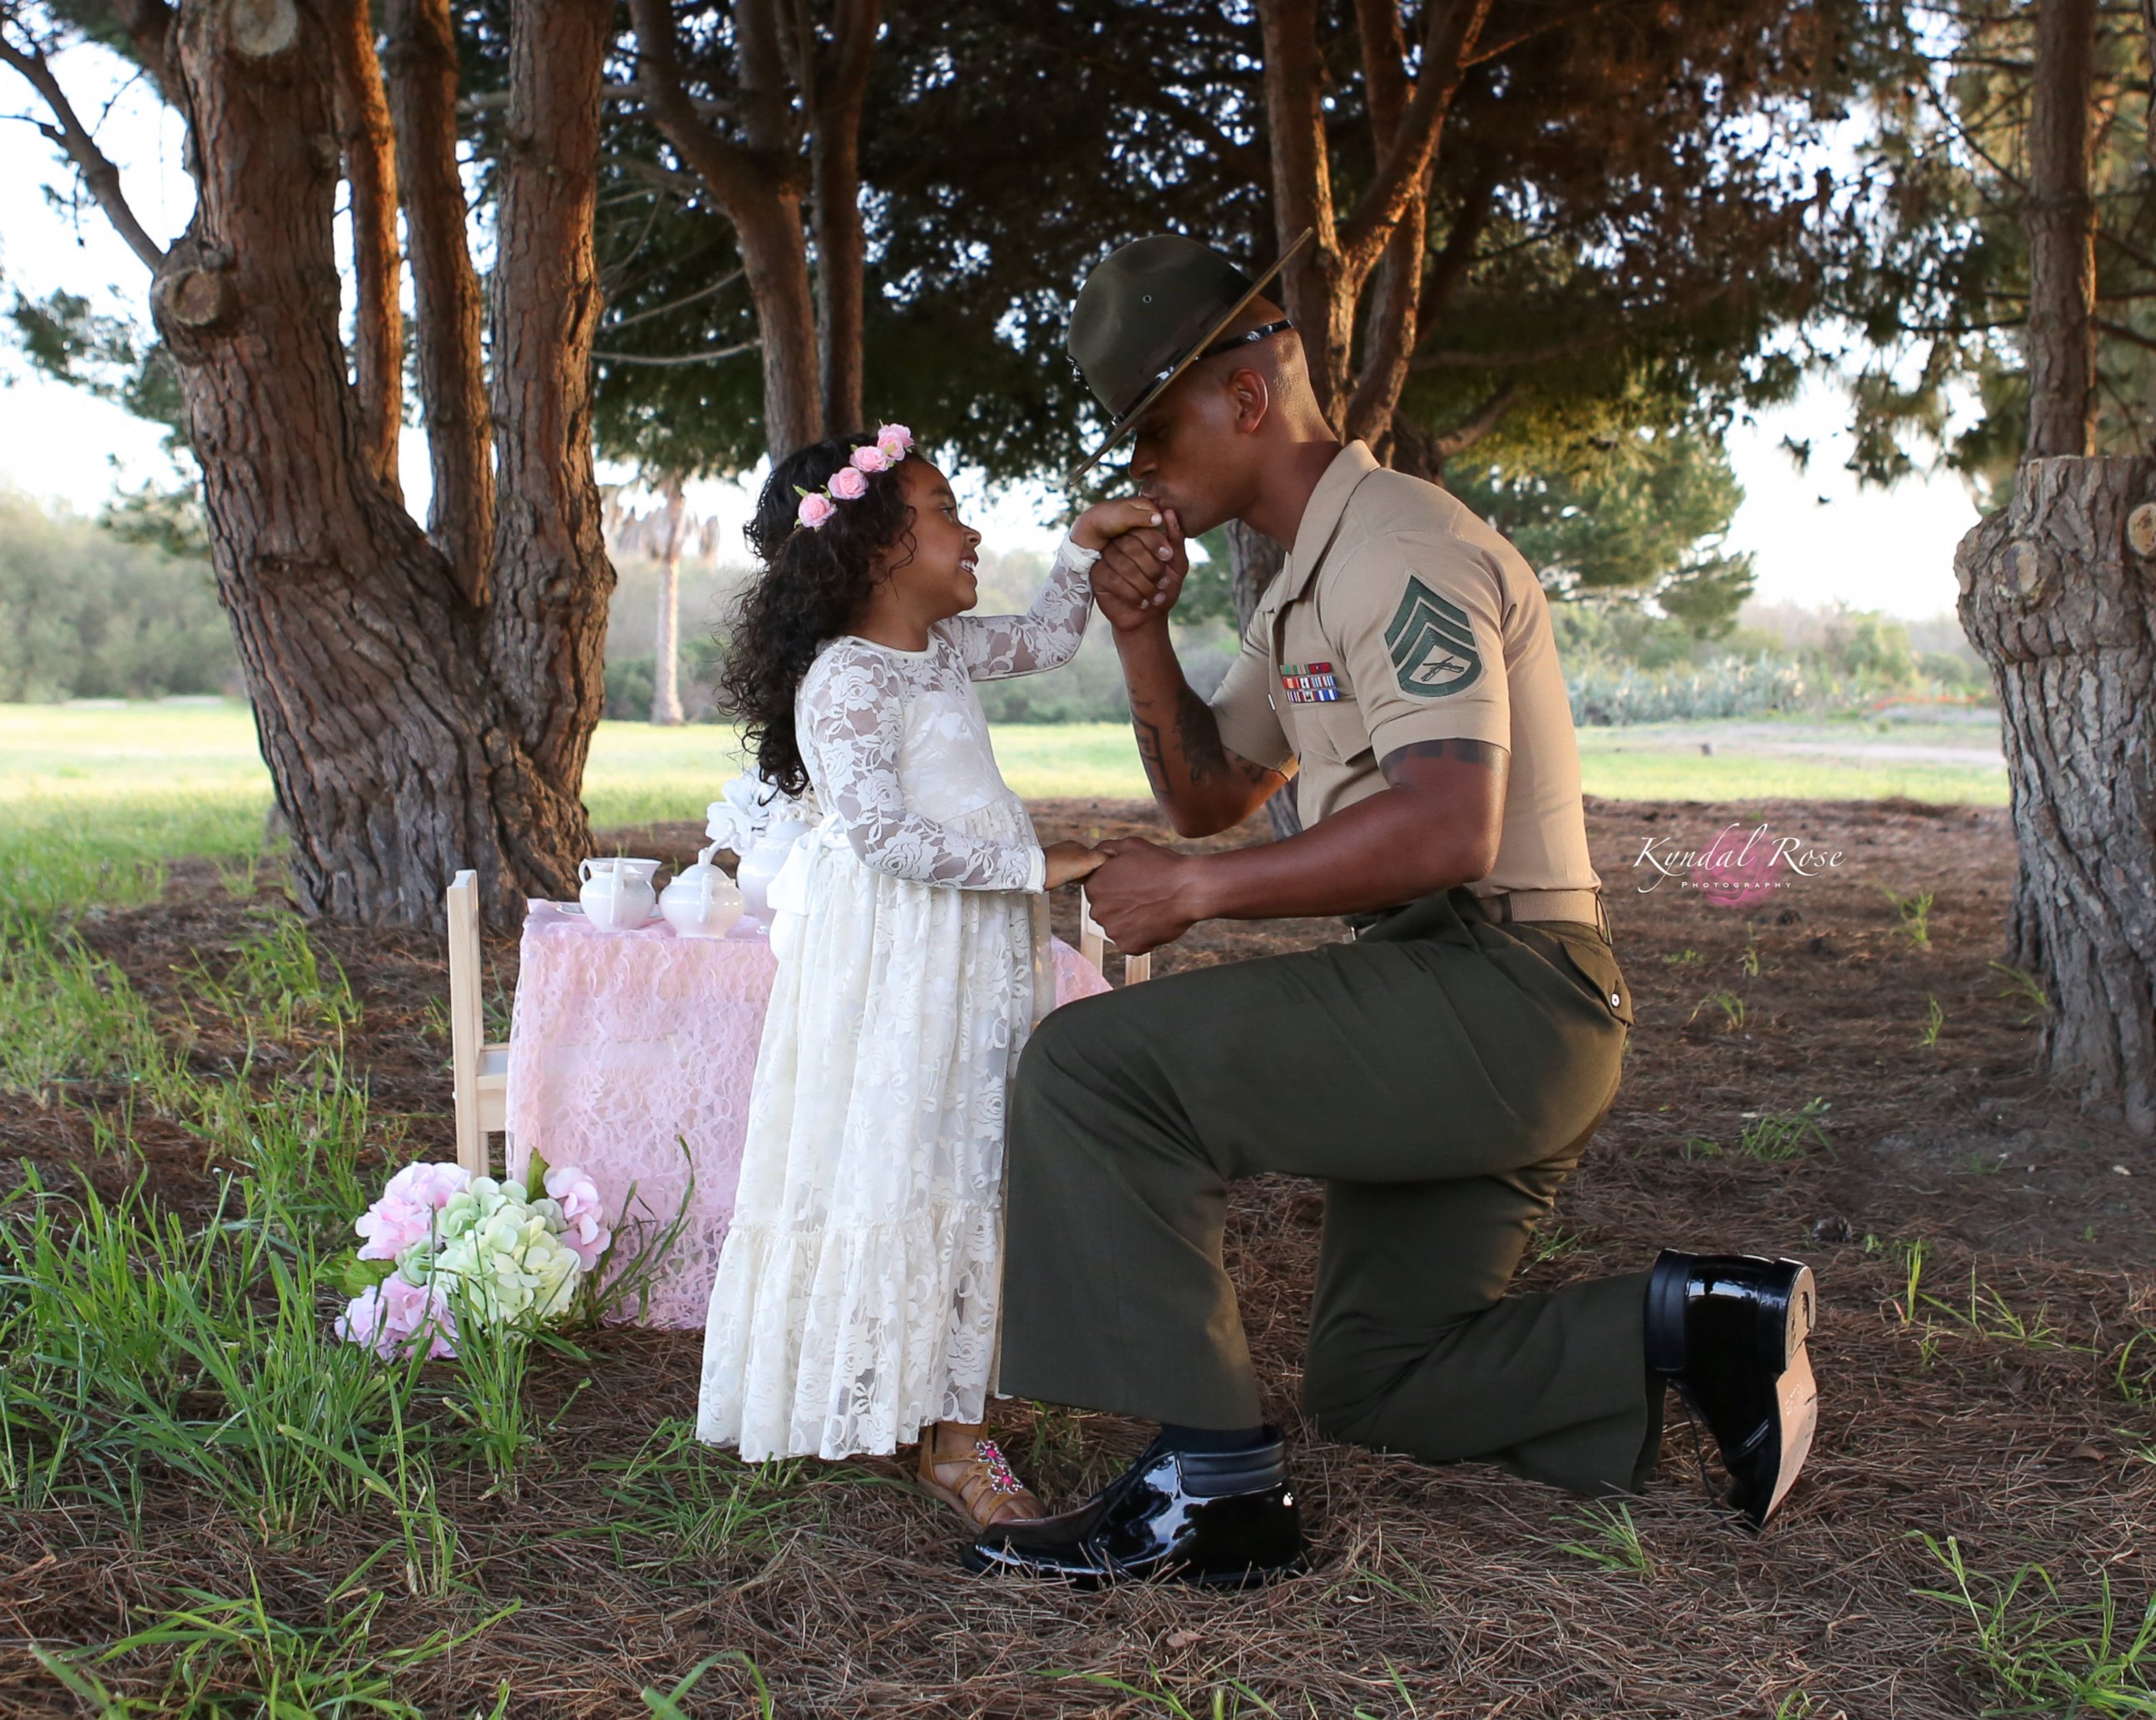 PHOTO: Kevin Porter, a U.S. Marine Corps drill instructor, had a tea part with his 4-year-old daughter, Ashley, in honor of April being the Month of the Military Child.